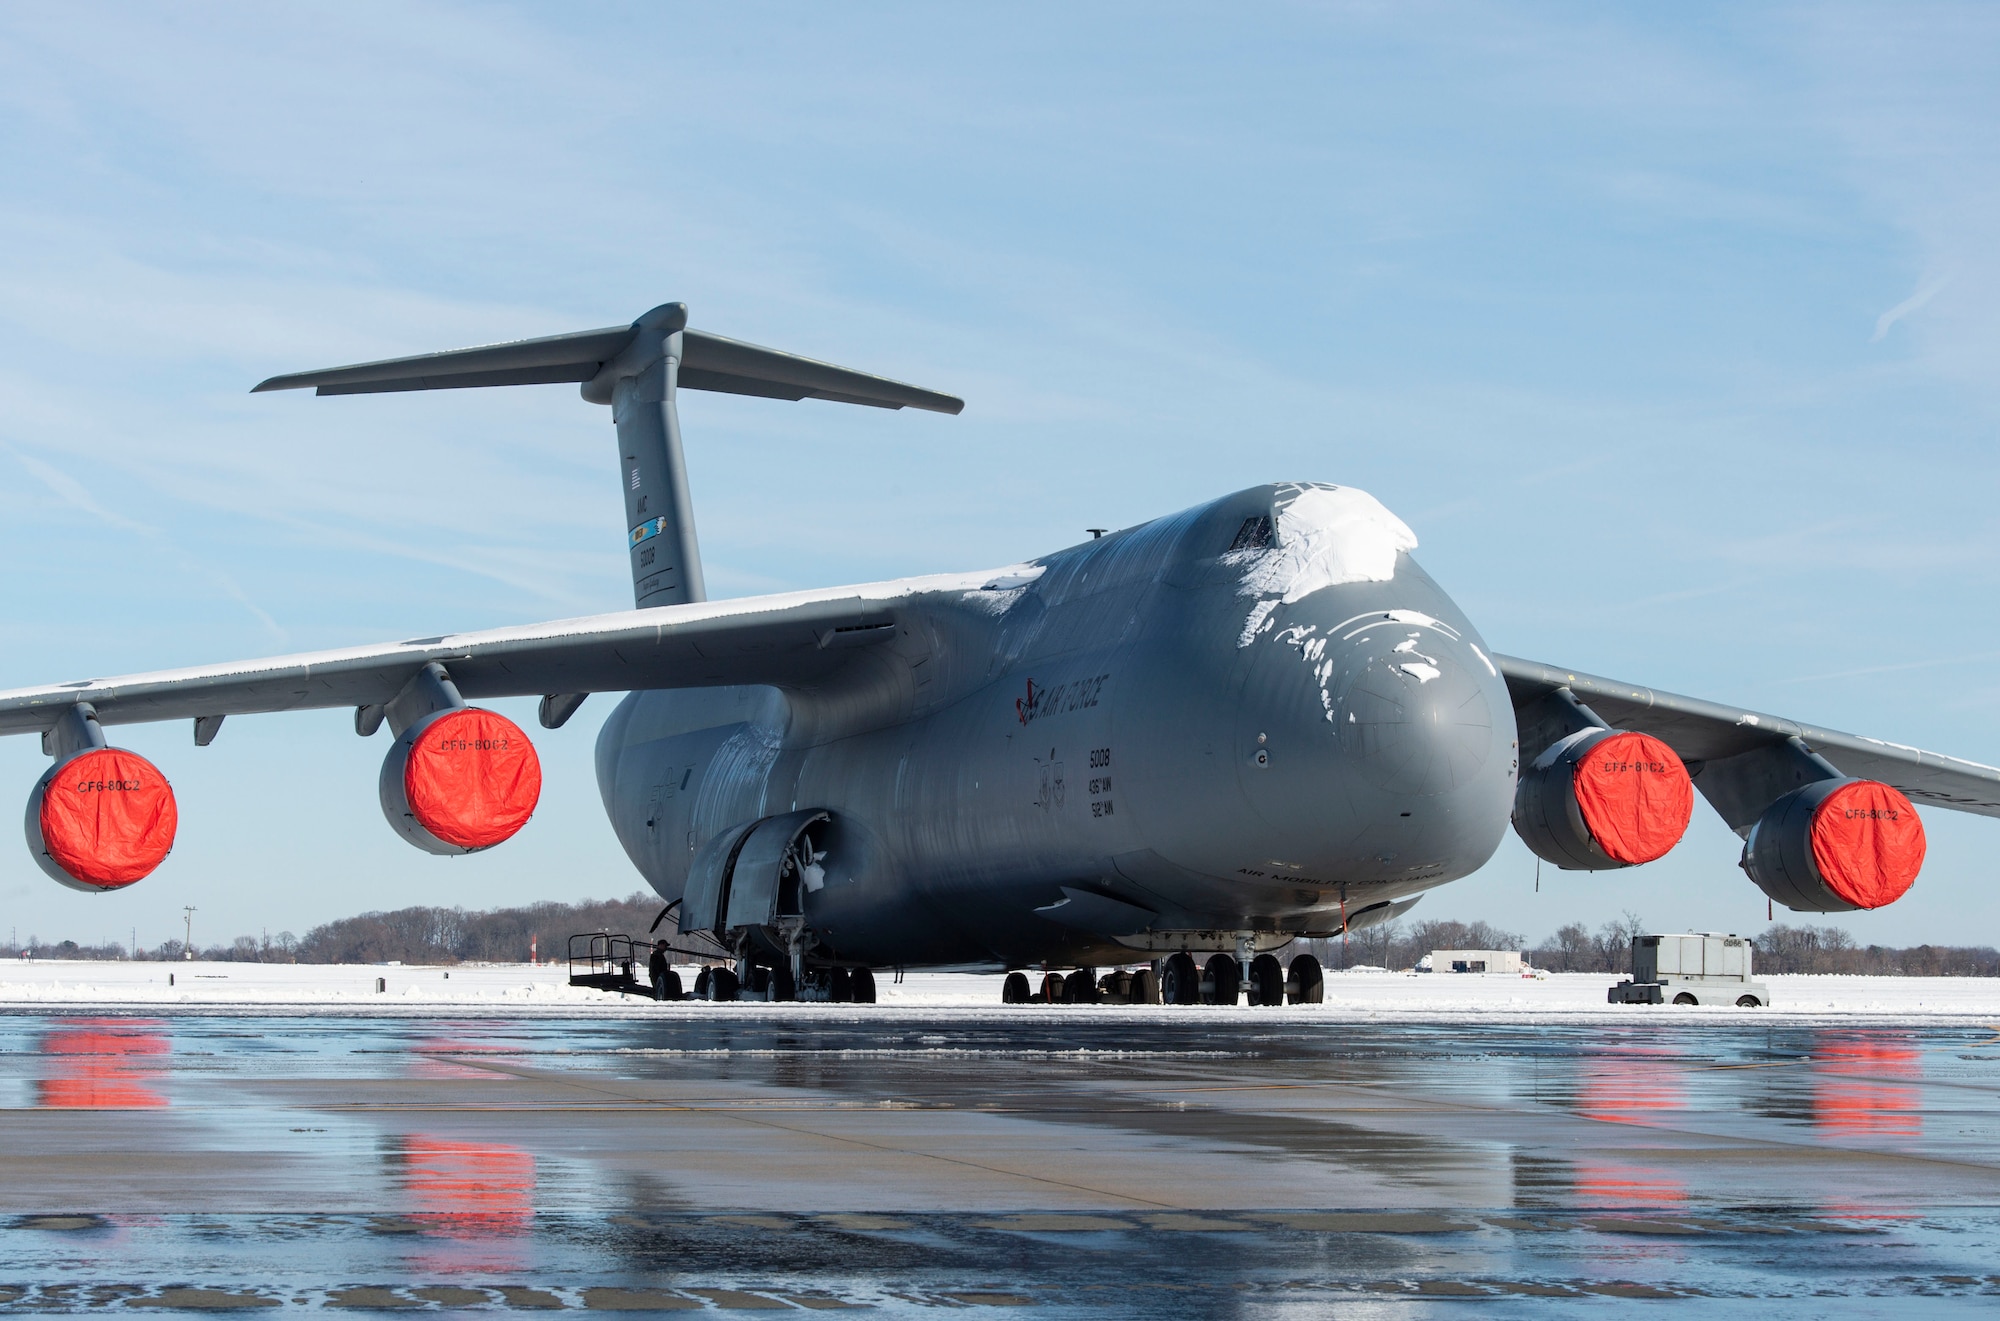 A snow-covered C-5M Super Galaxy sits on the flight line at Dover Air Force Base, Delaware, Jan. 4, 2022. Winter Storm Frida dropped eight inches of snow on the base, initiating the first snow removal operations of the year. (U.S. Air Force photo by Roland Balik)